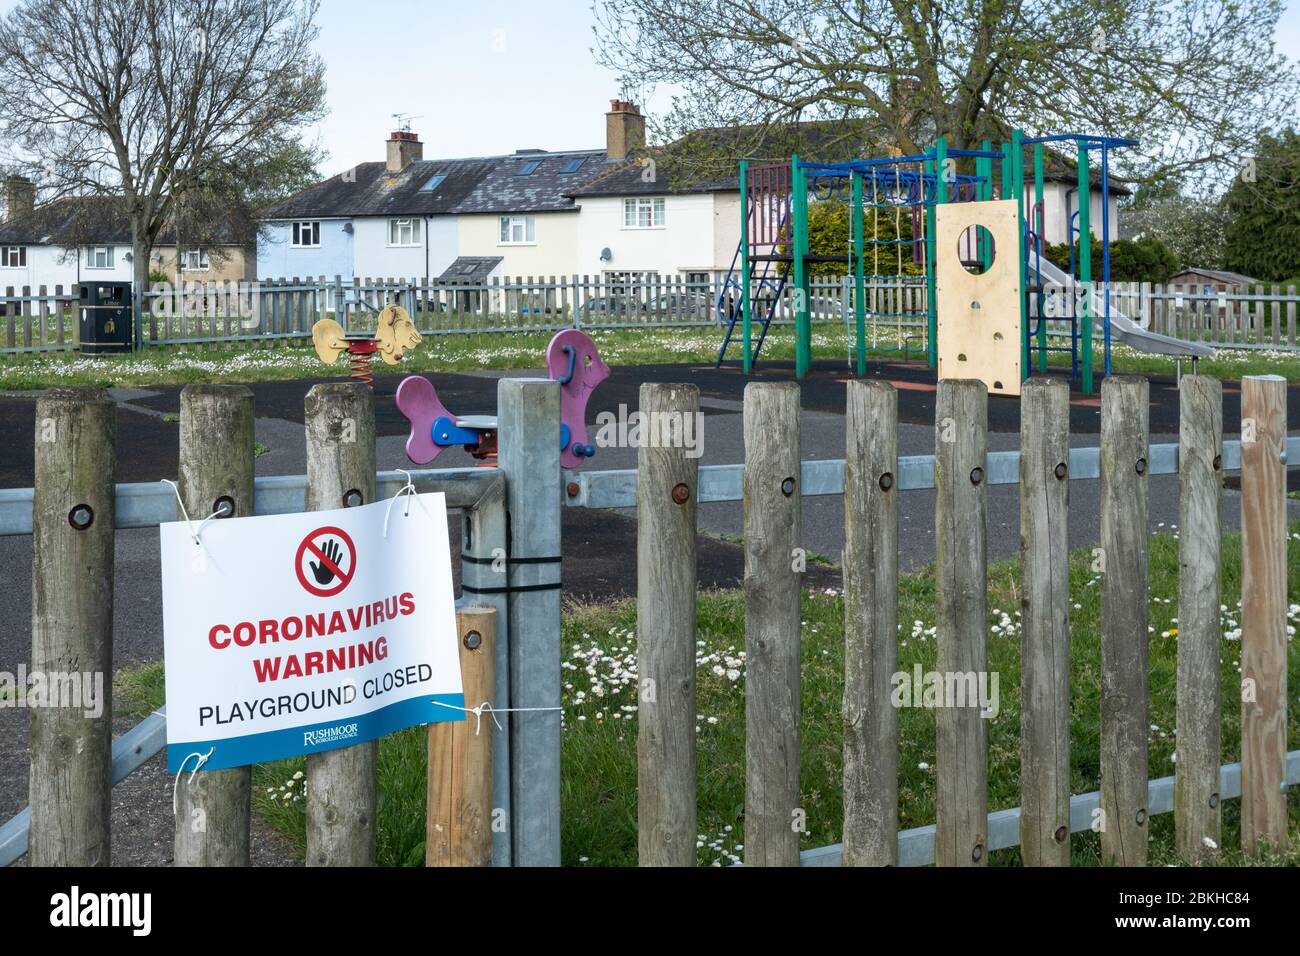 Children's playground with a closed sign due to the coronavirus covid-19 pandemic lockdown in 2020, UK Stock Photo